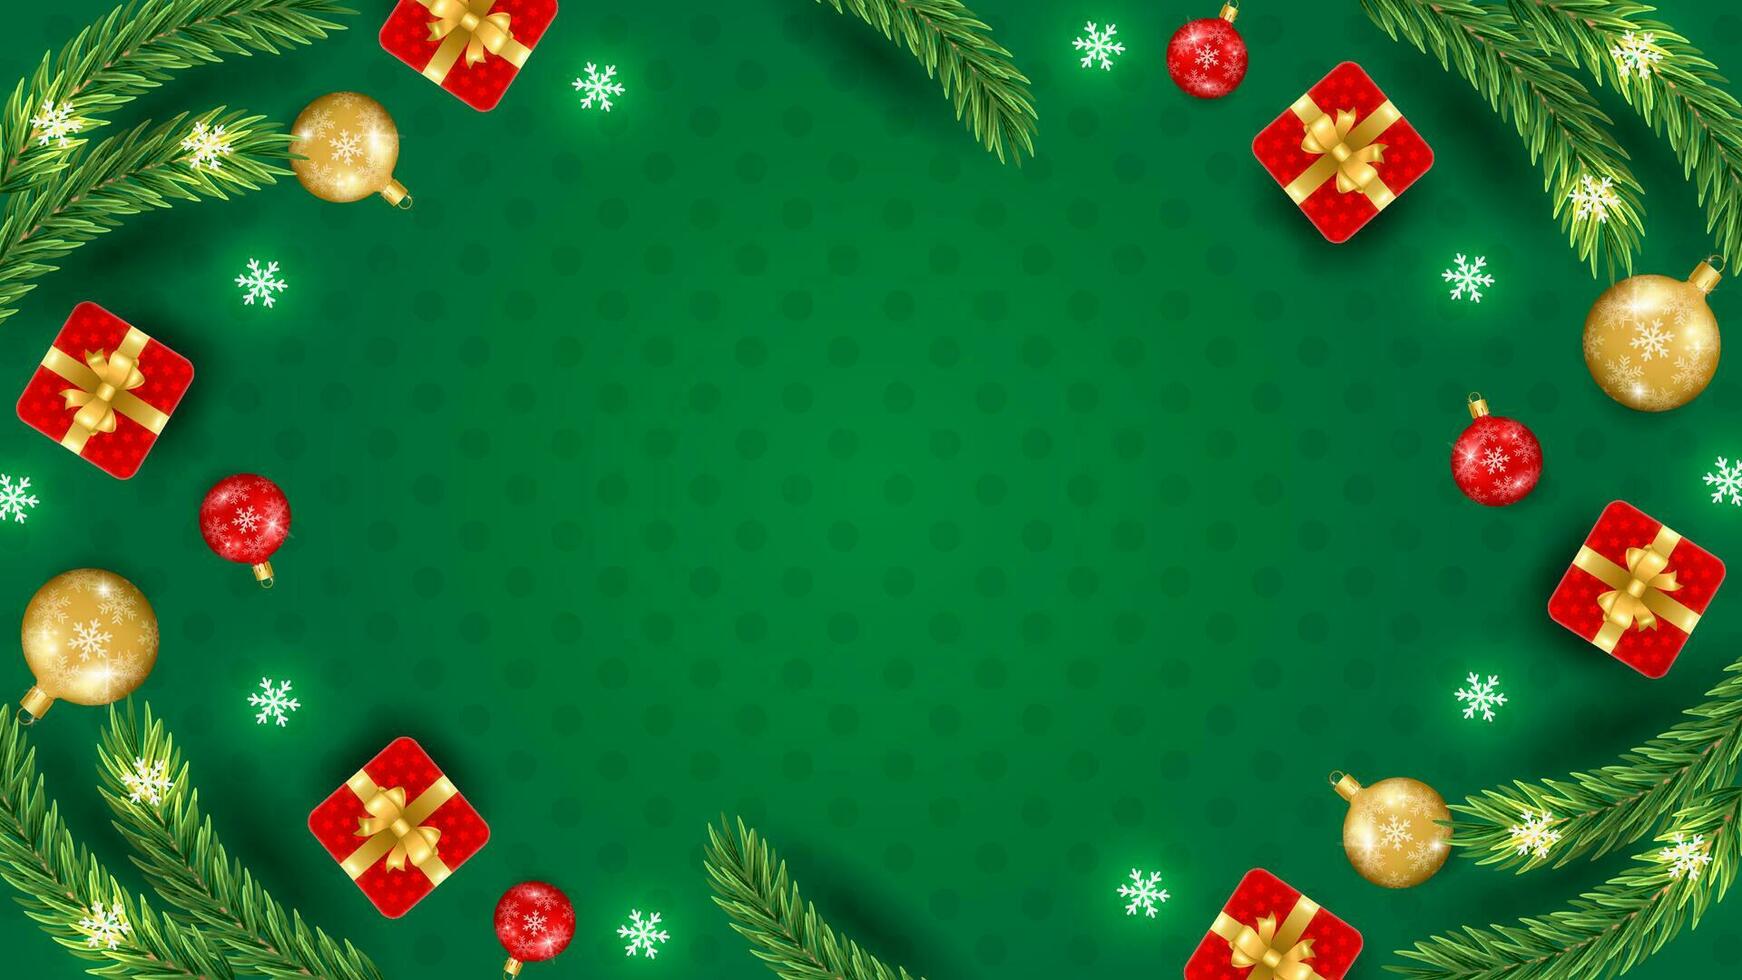 Merry Christmas and Happy New Year background with Christmas branch, balls, snowflakes. For sale, banner, posters, cover design templates, social media wallpaper stories vector